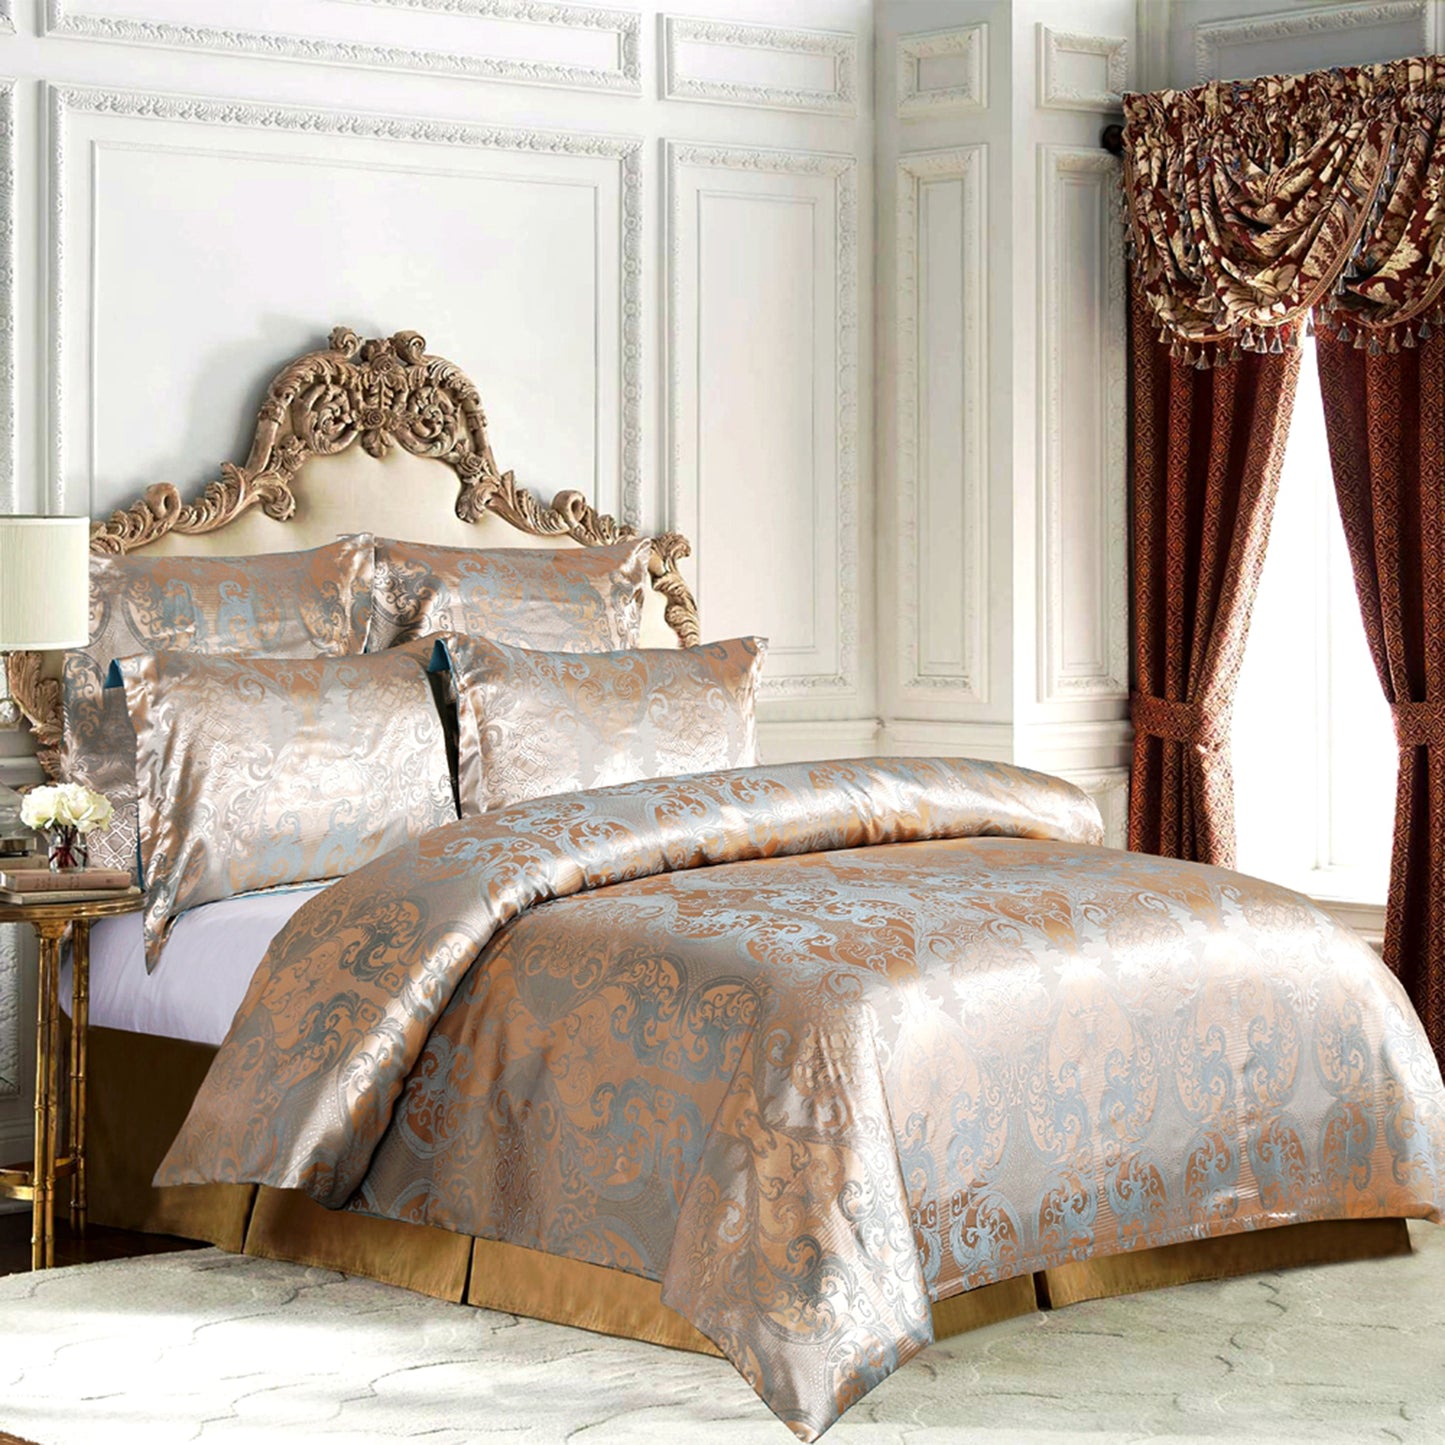 WONGS BEDDING Bronze Embroidery Satin Craft Duvet Cover Set With 2 Pillow Case